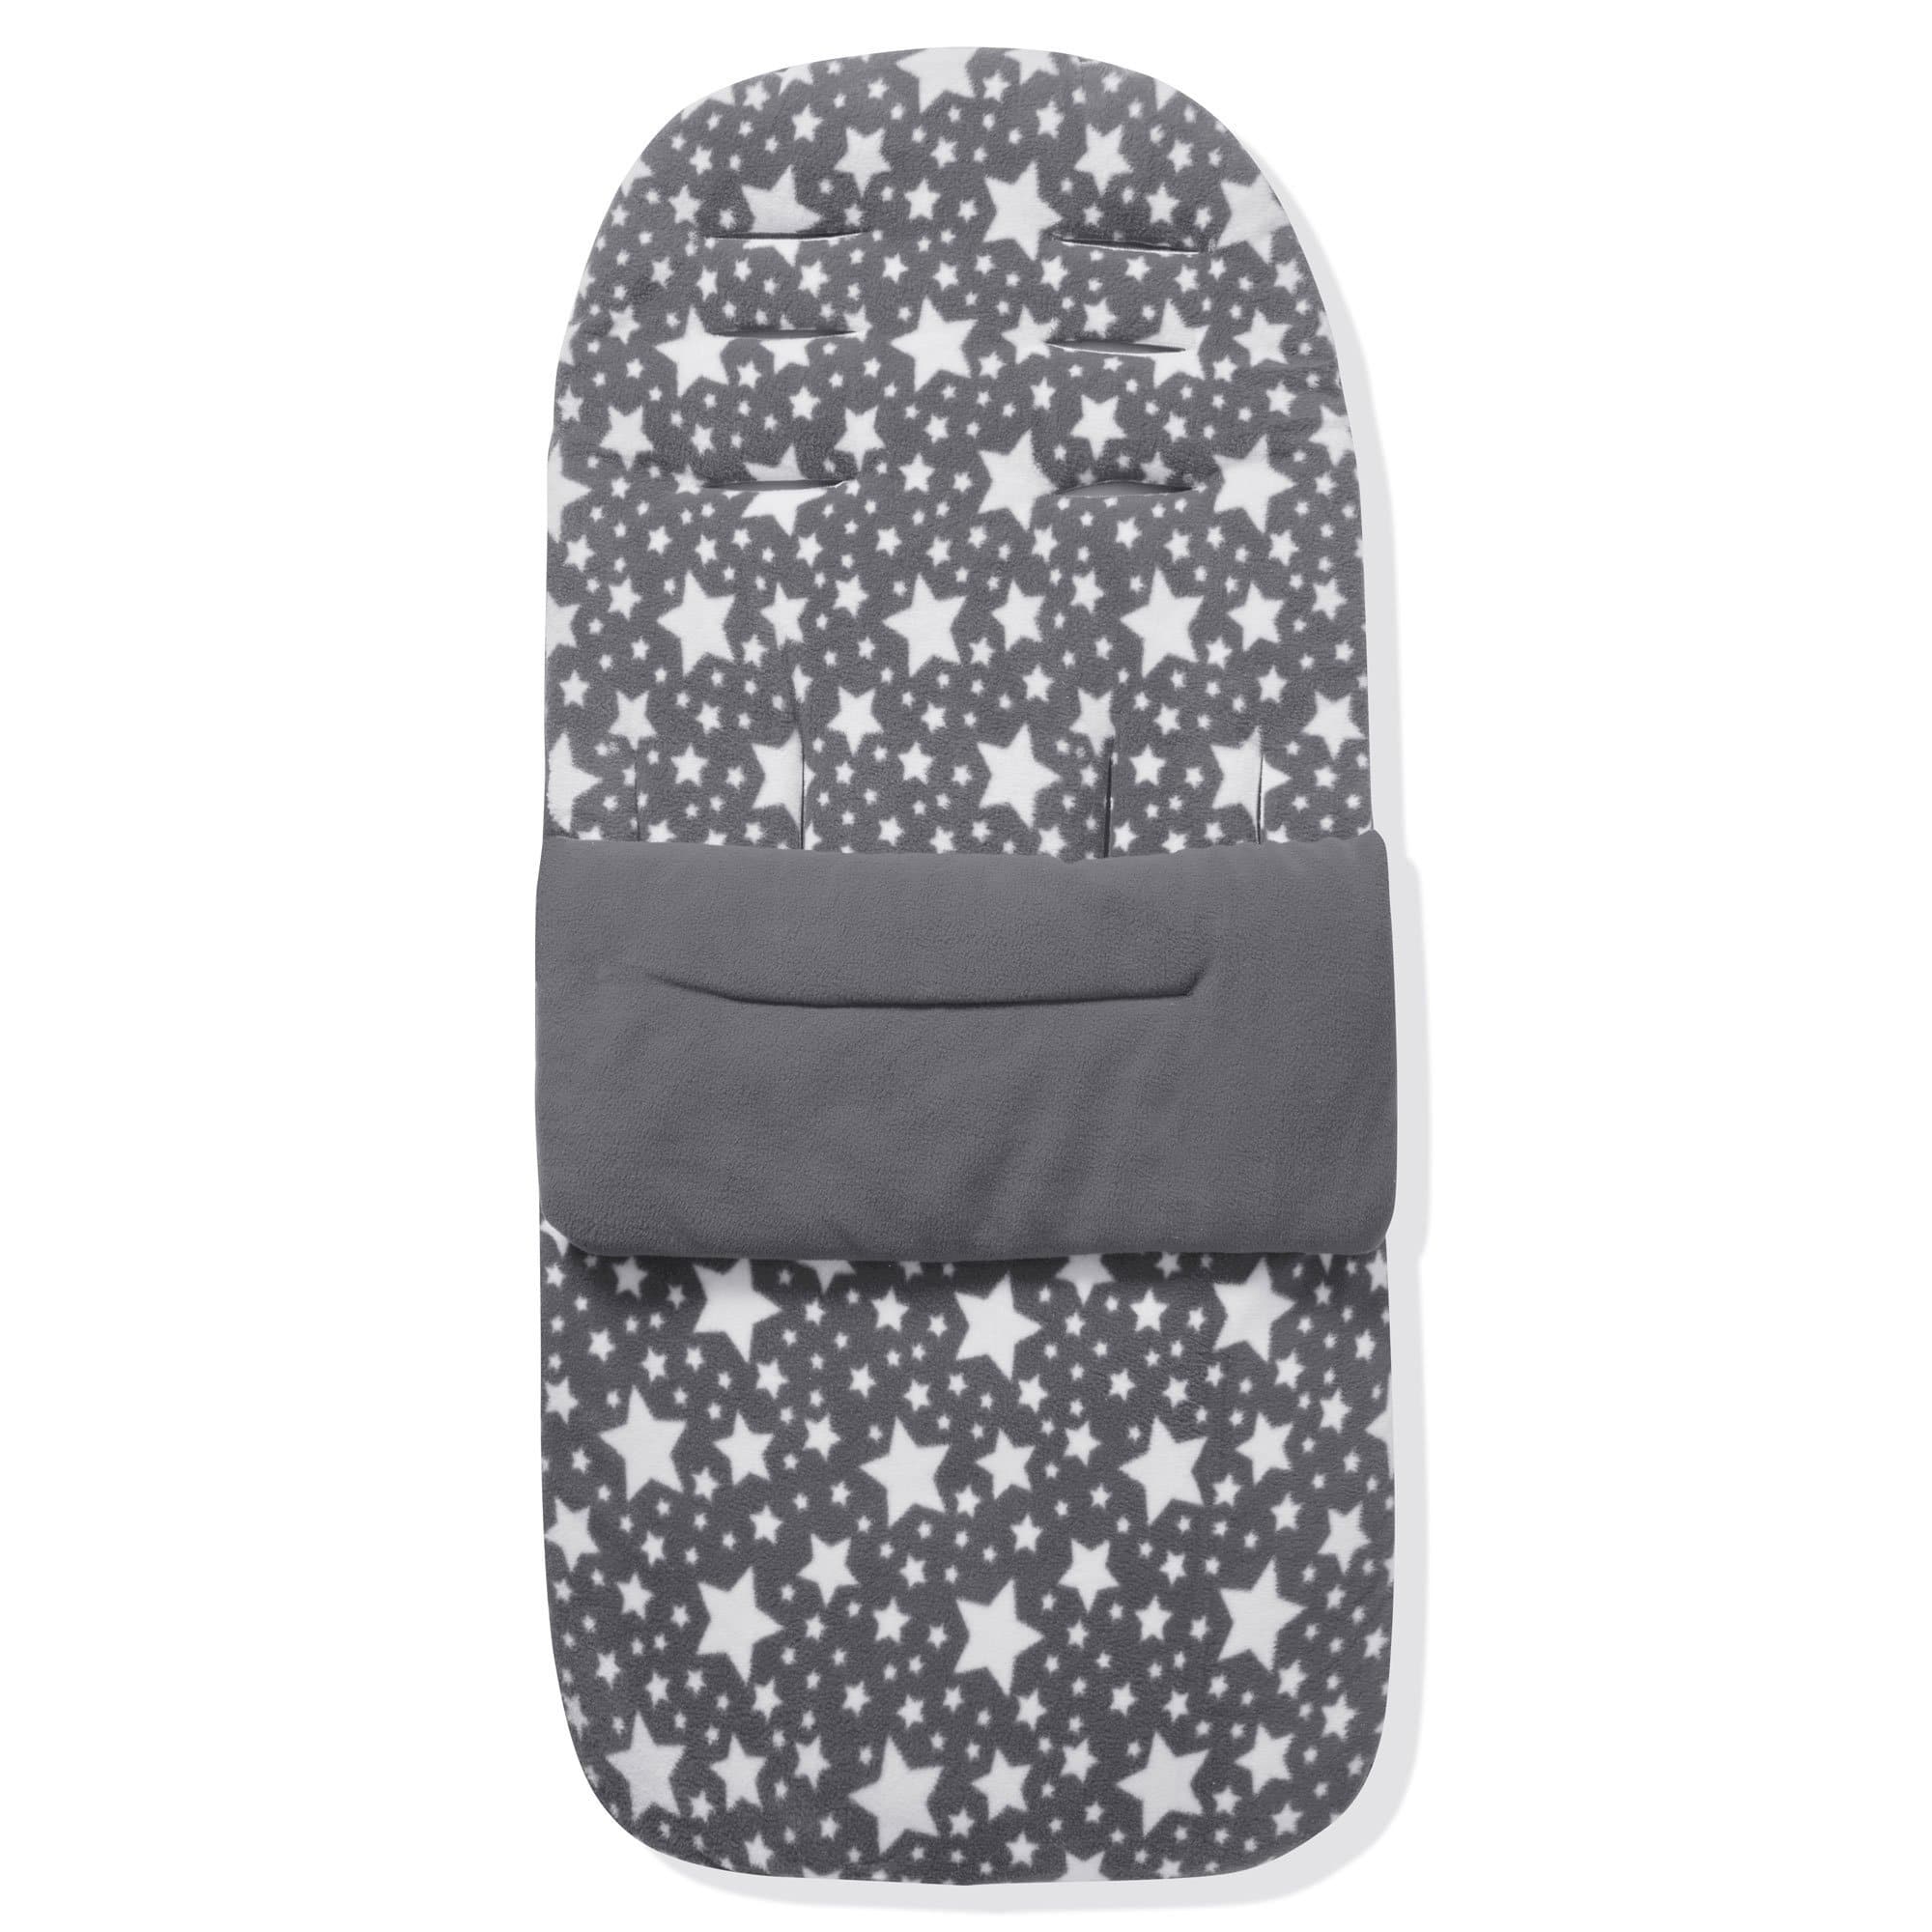 Fleece Footmuff / Cosy Toes Compatible with Ickle Bubba - Grey Star / Fits All Models | For Your Little One